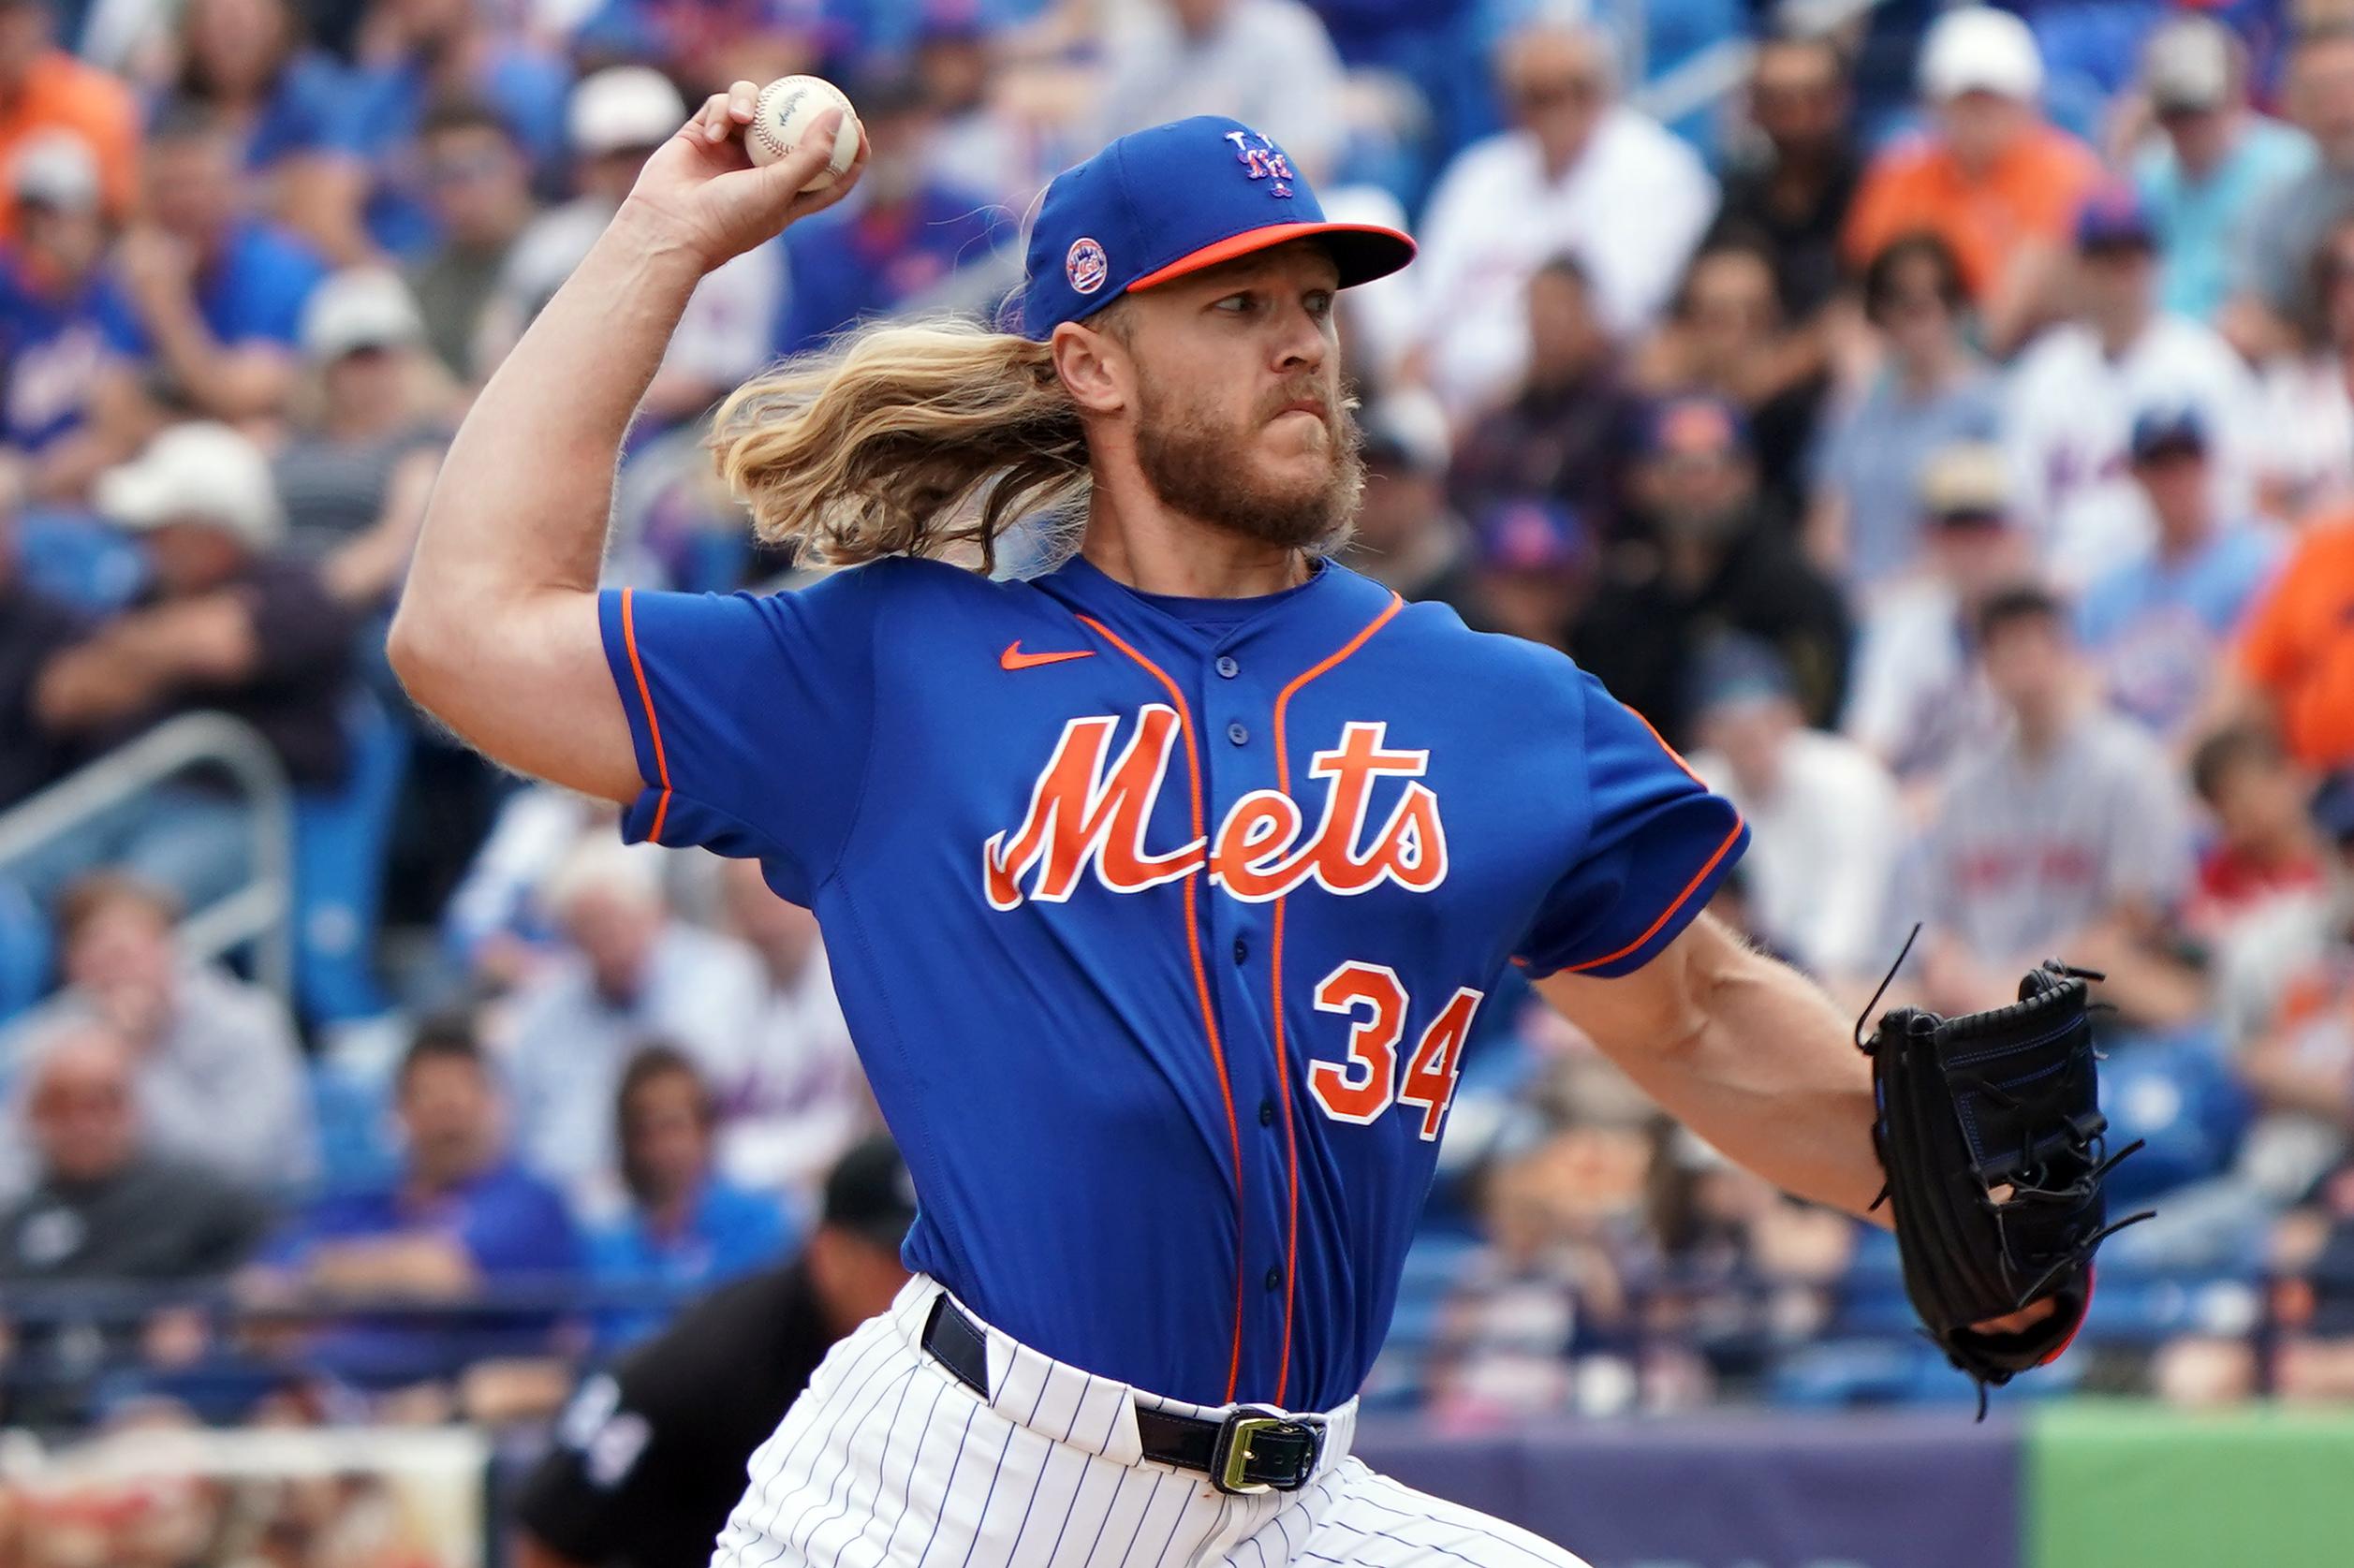 Mar 8, 2020; Port St. Lucie, Florida, USA; New York Mets starting pitcher Noah Syndergaard (34) throws in the first inning Houston Astros at Clover Park. / Steve Mitchell-USA TODAY Sports